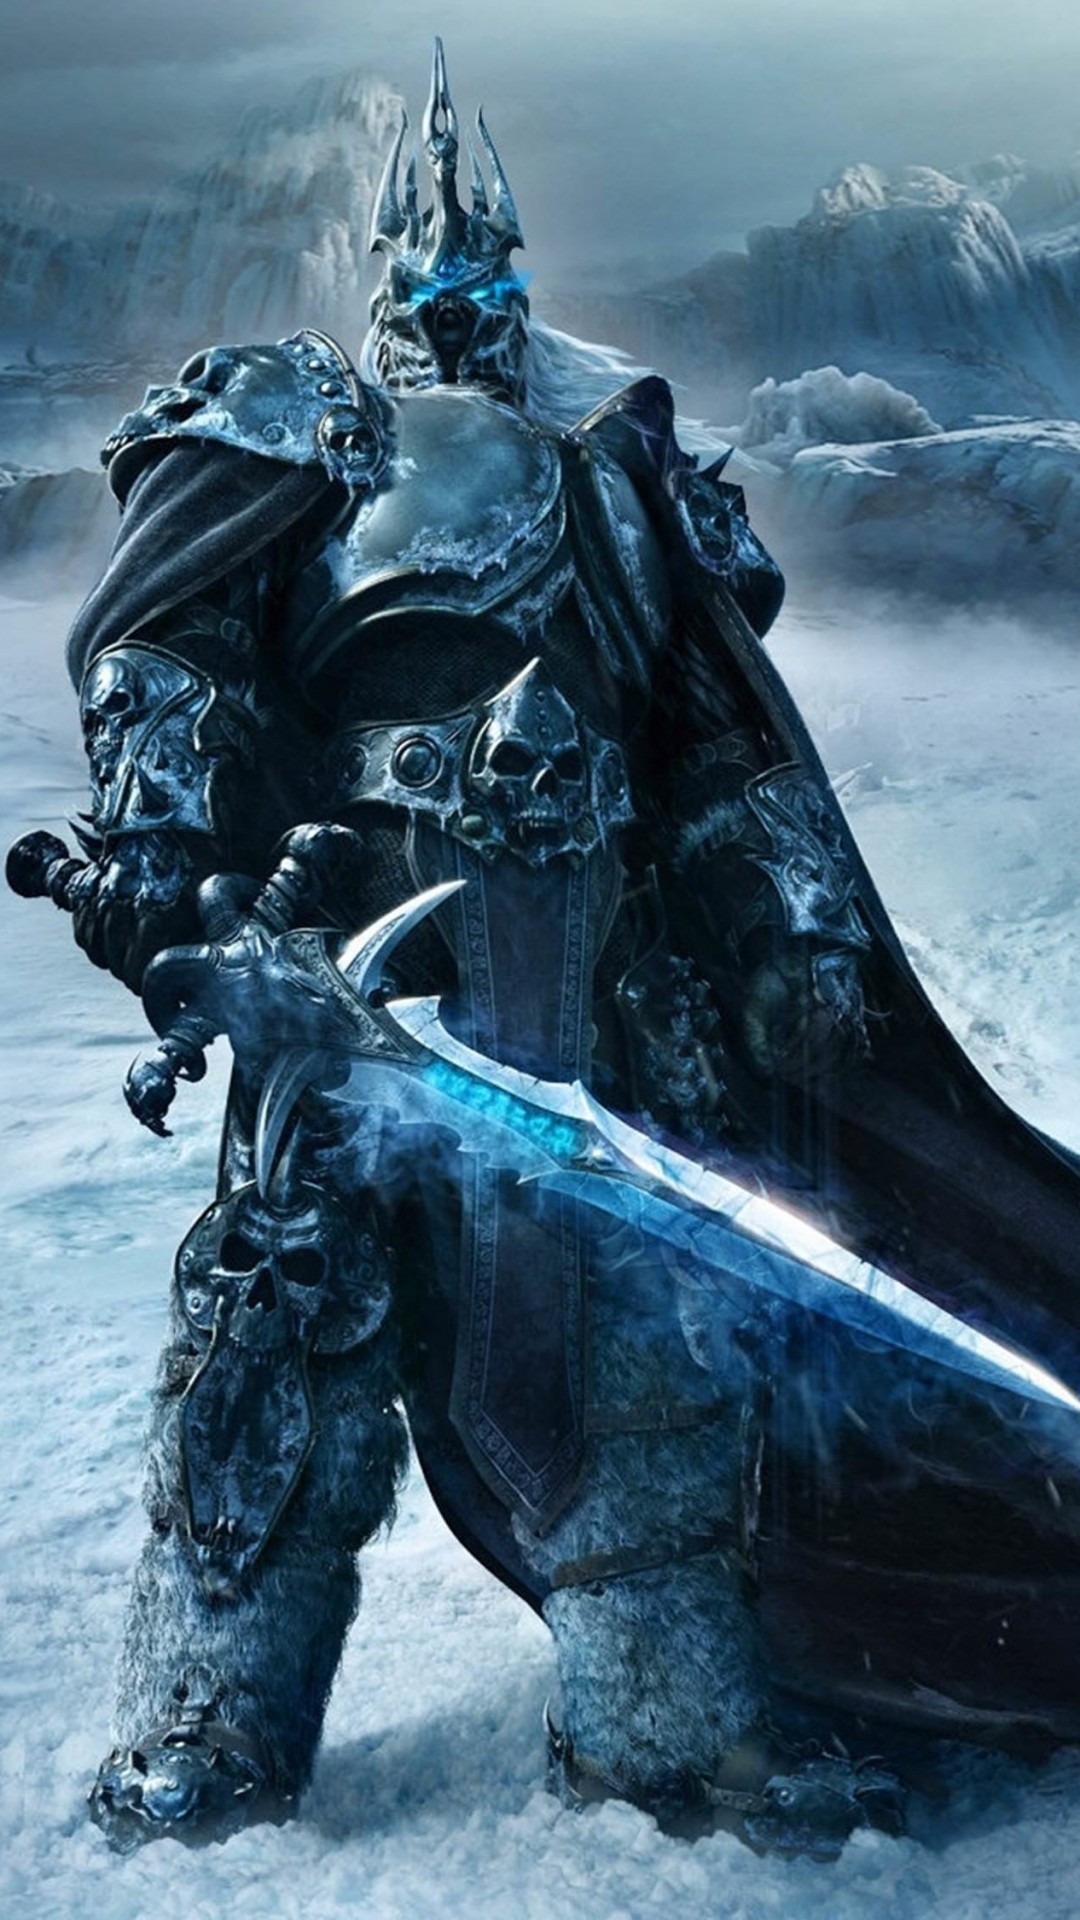 World of Warcraft: Wrath of the Lich King Wallpaper for LG G2